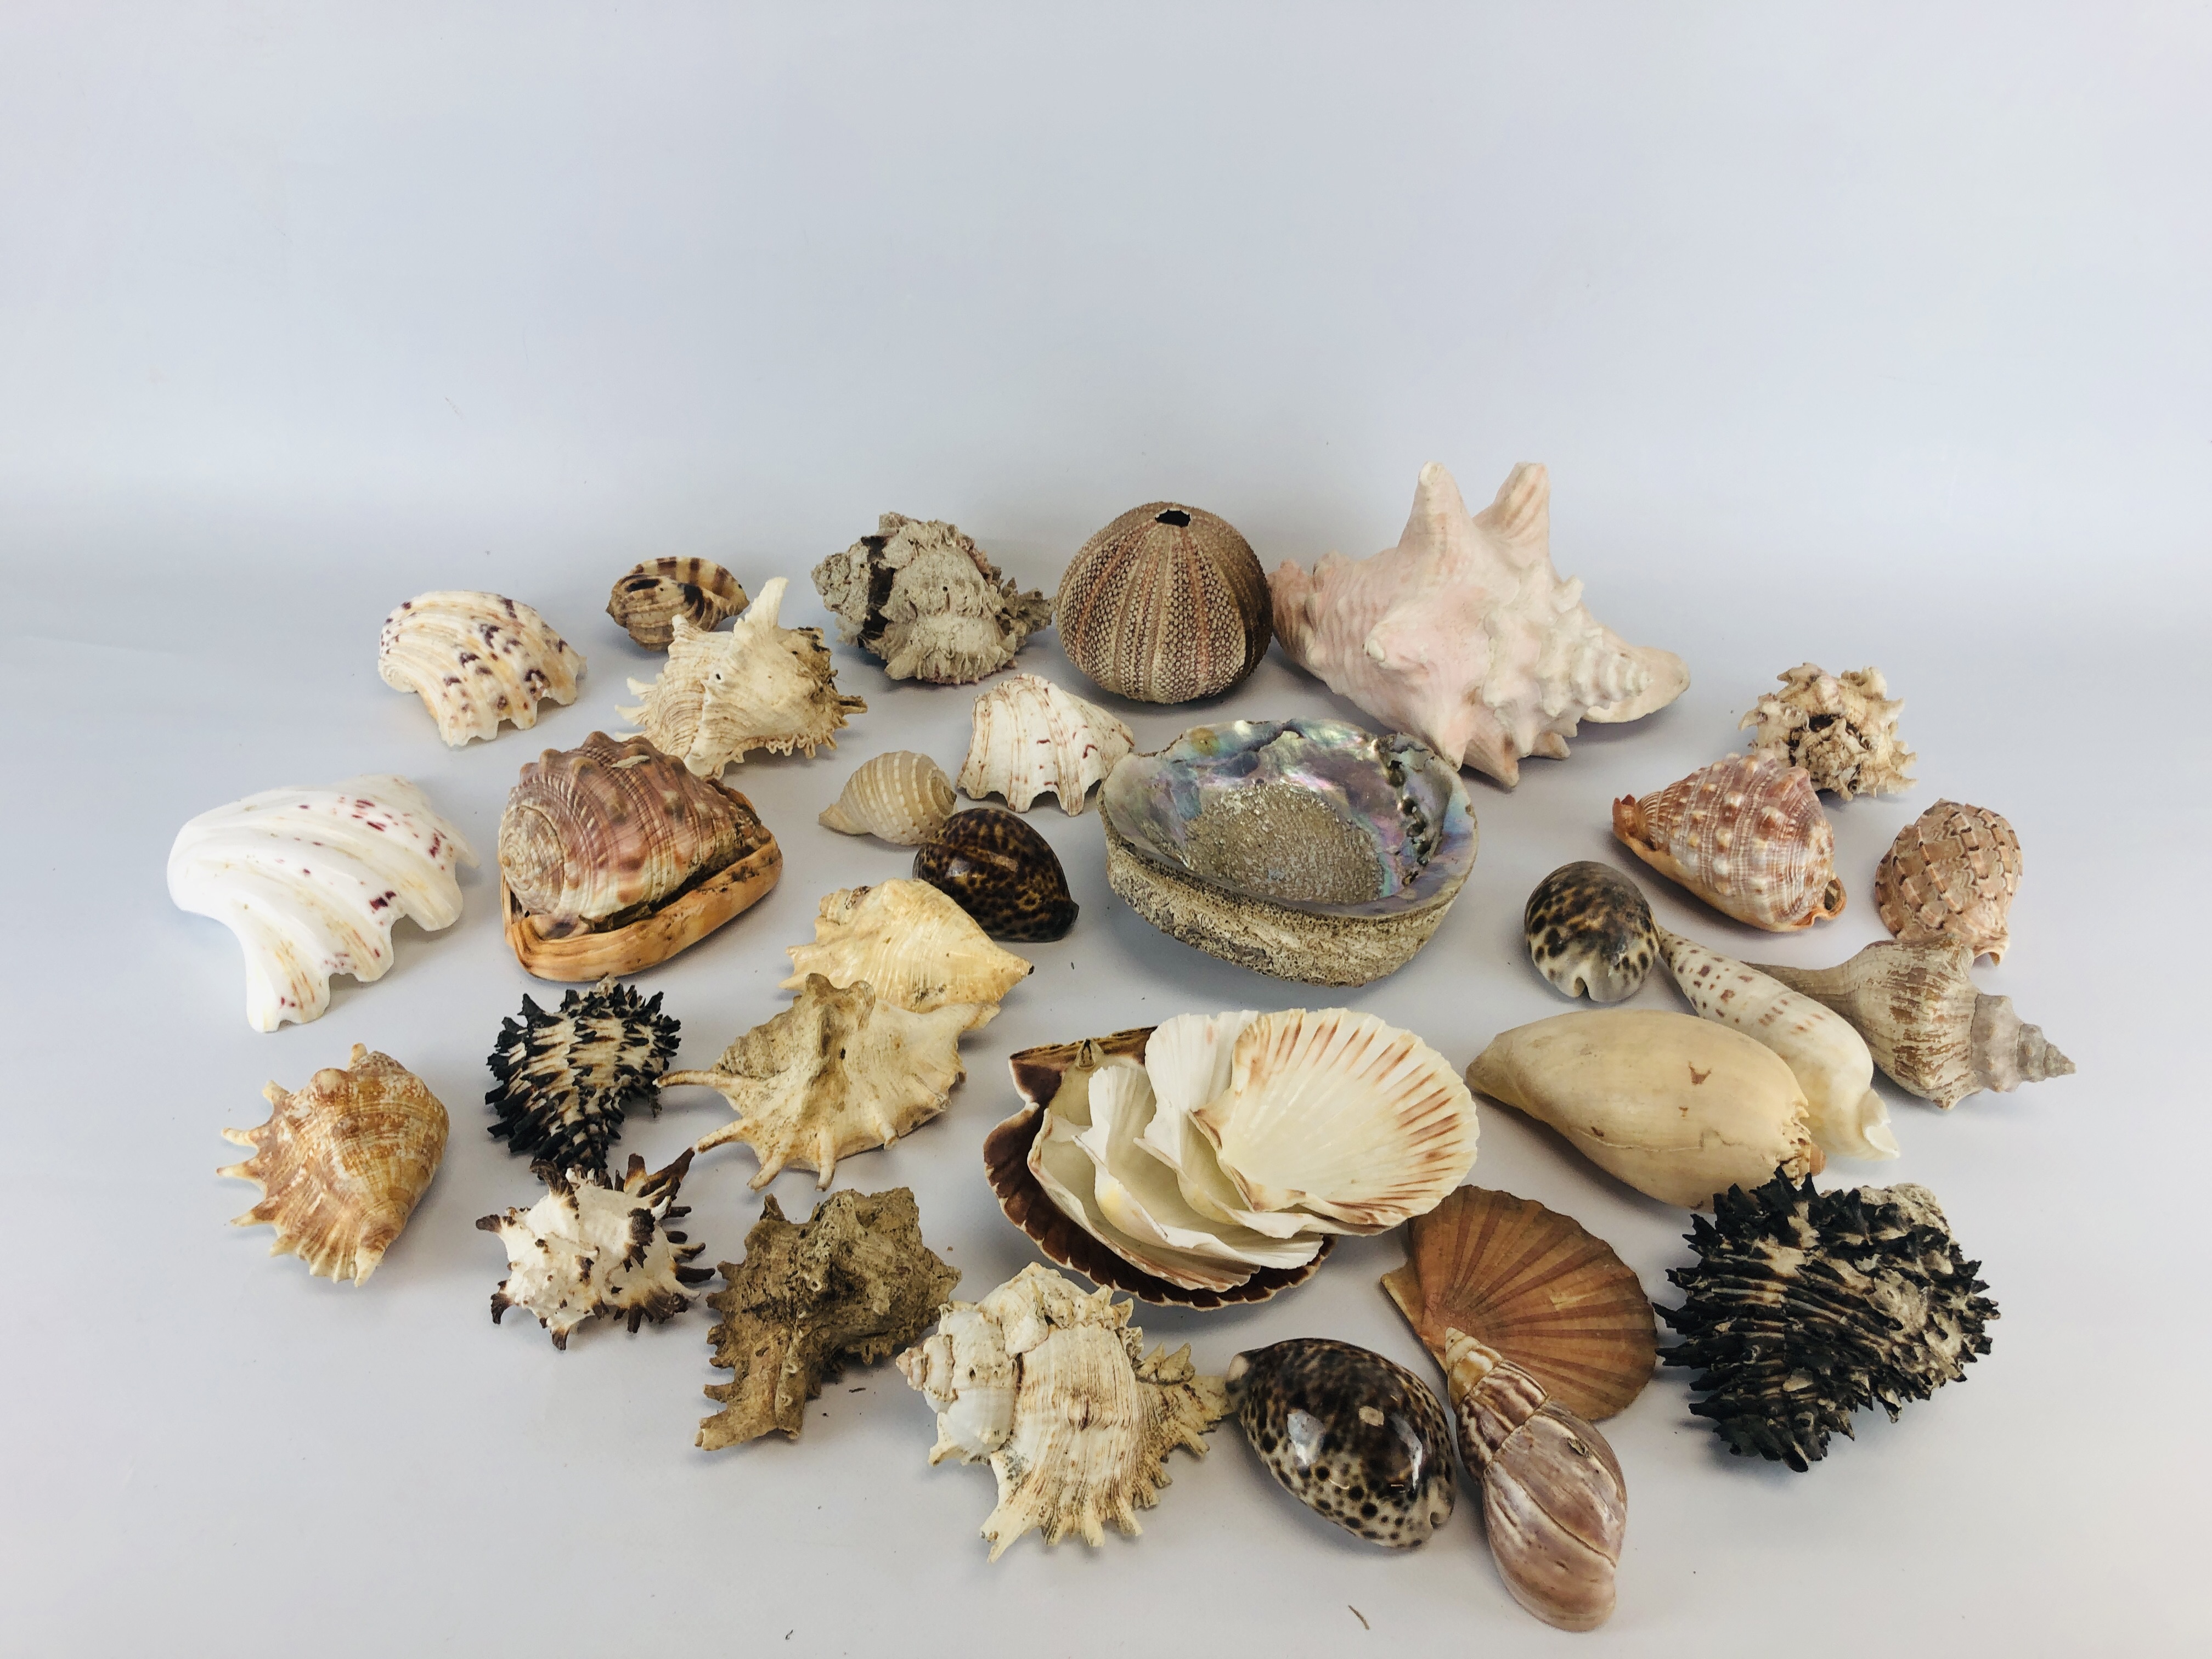 A BOX CONTAINING A LARGE COLLECTION OF ASSORTED SHELLS.